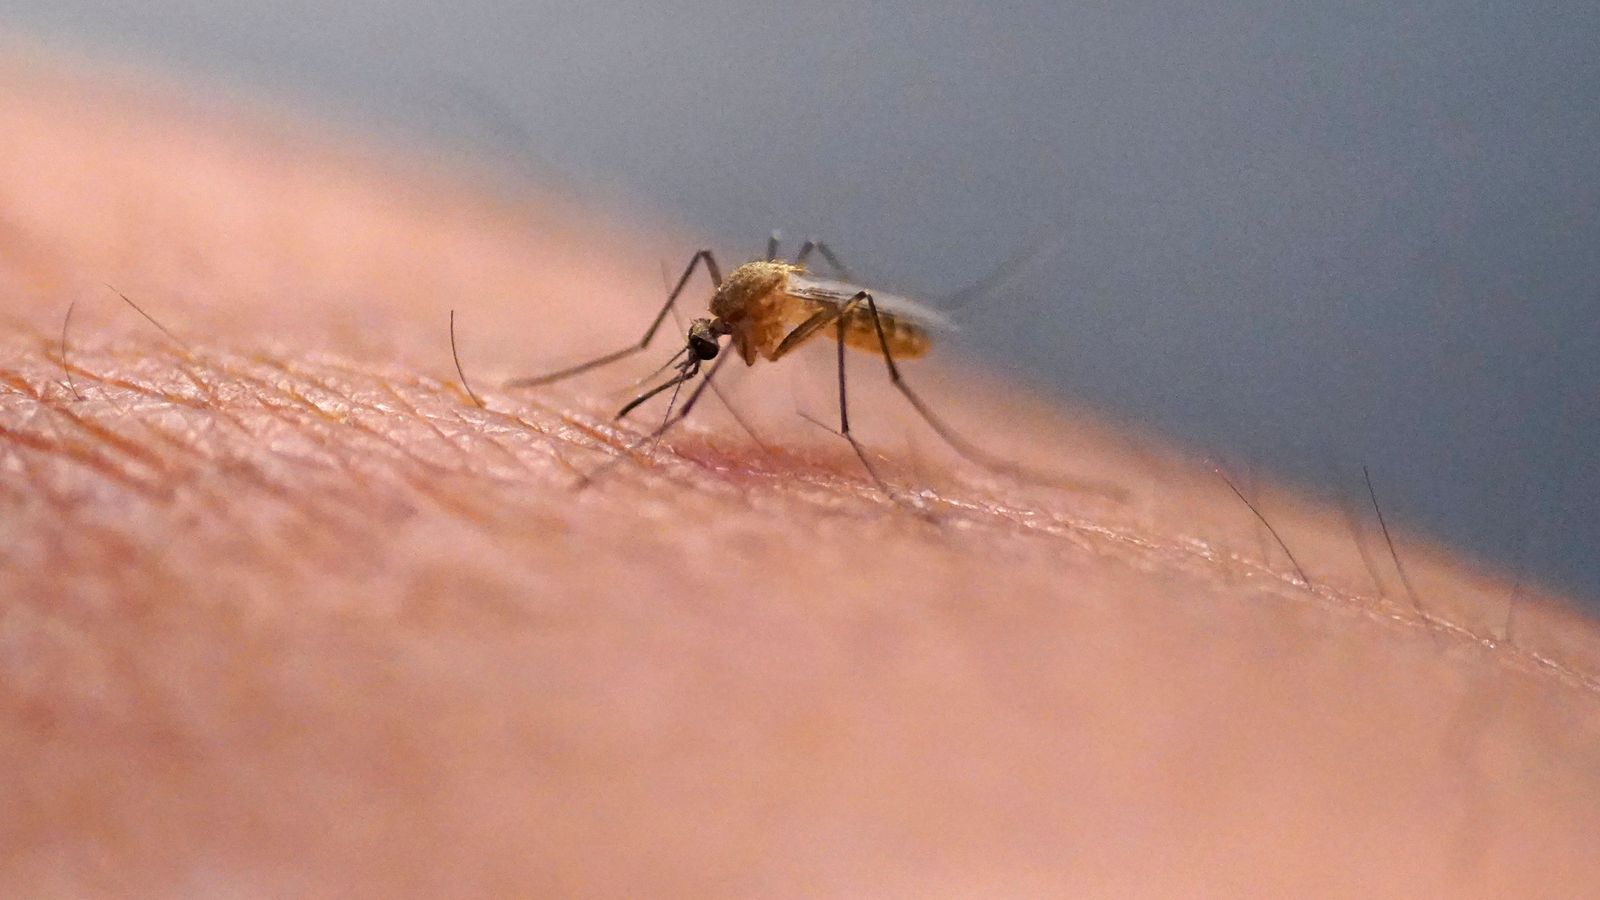 Over half of world’s population could be at risk of mosquito-borne diseases, experts warn